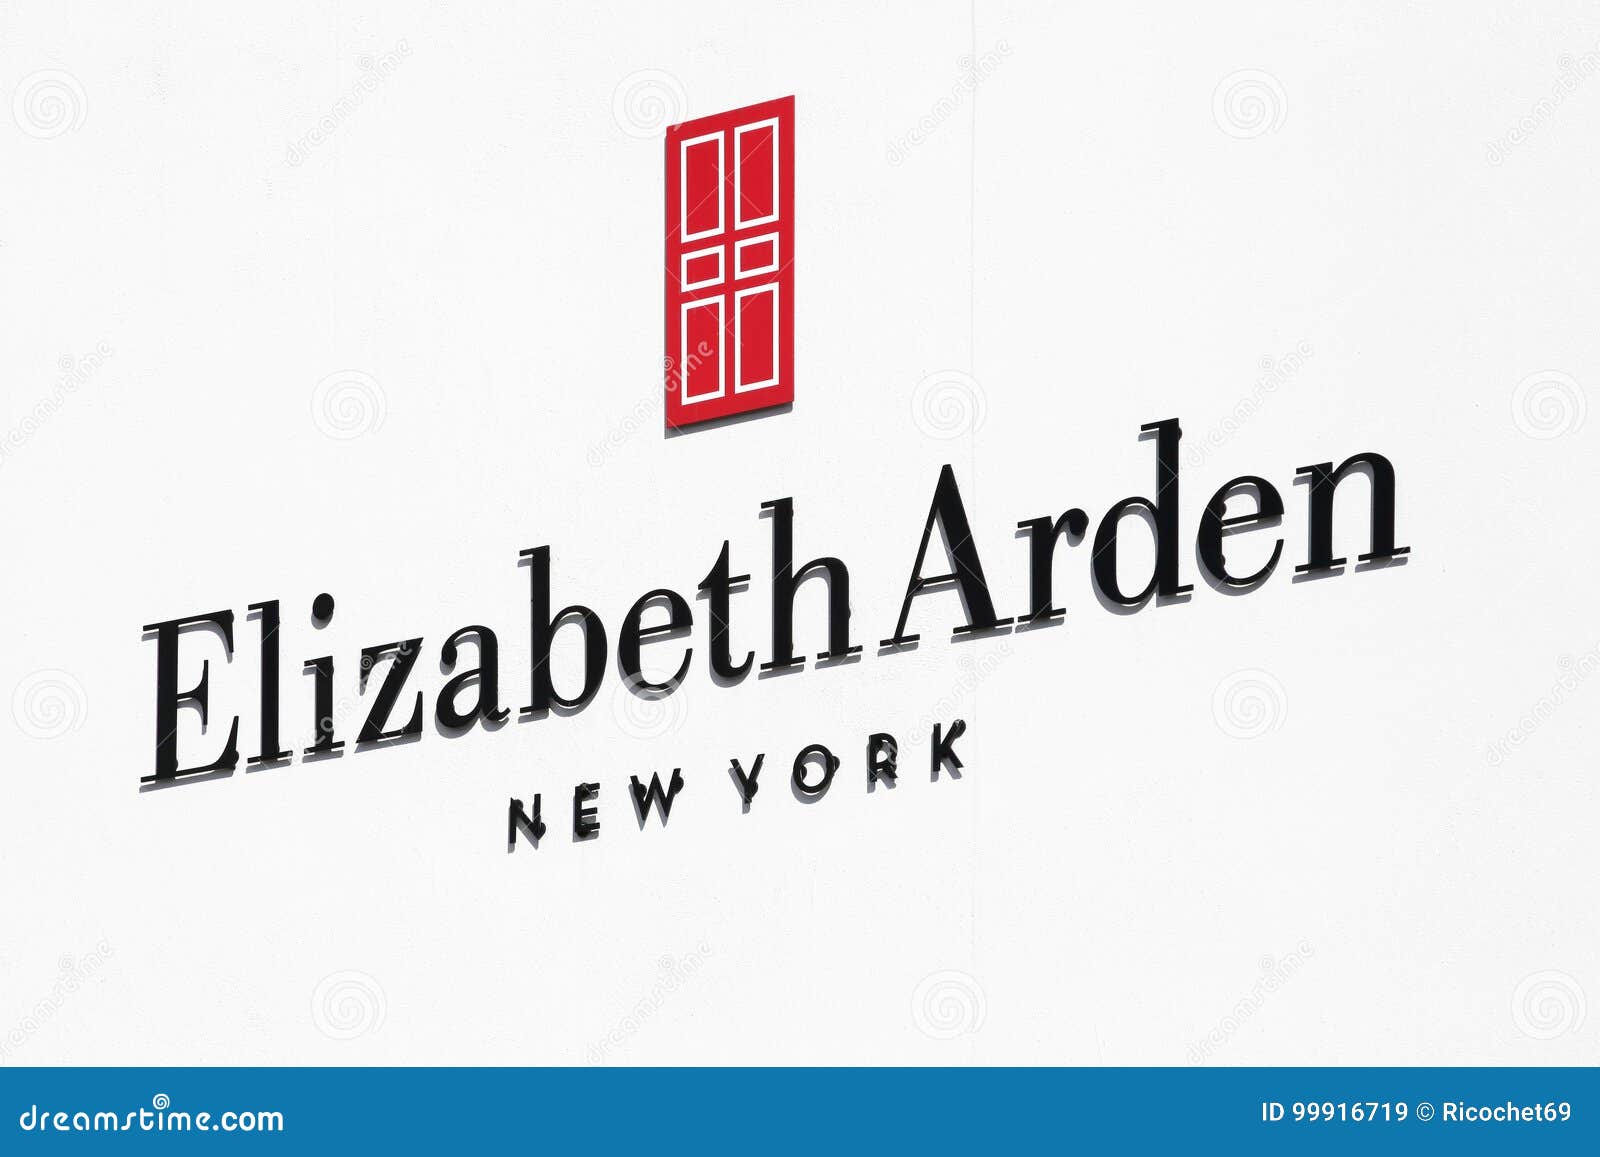 Elizabeth Arden Logo on a Wall Editorial Stock Image - Image of sale ...